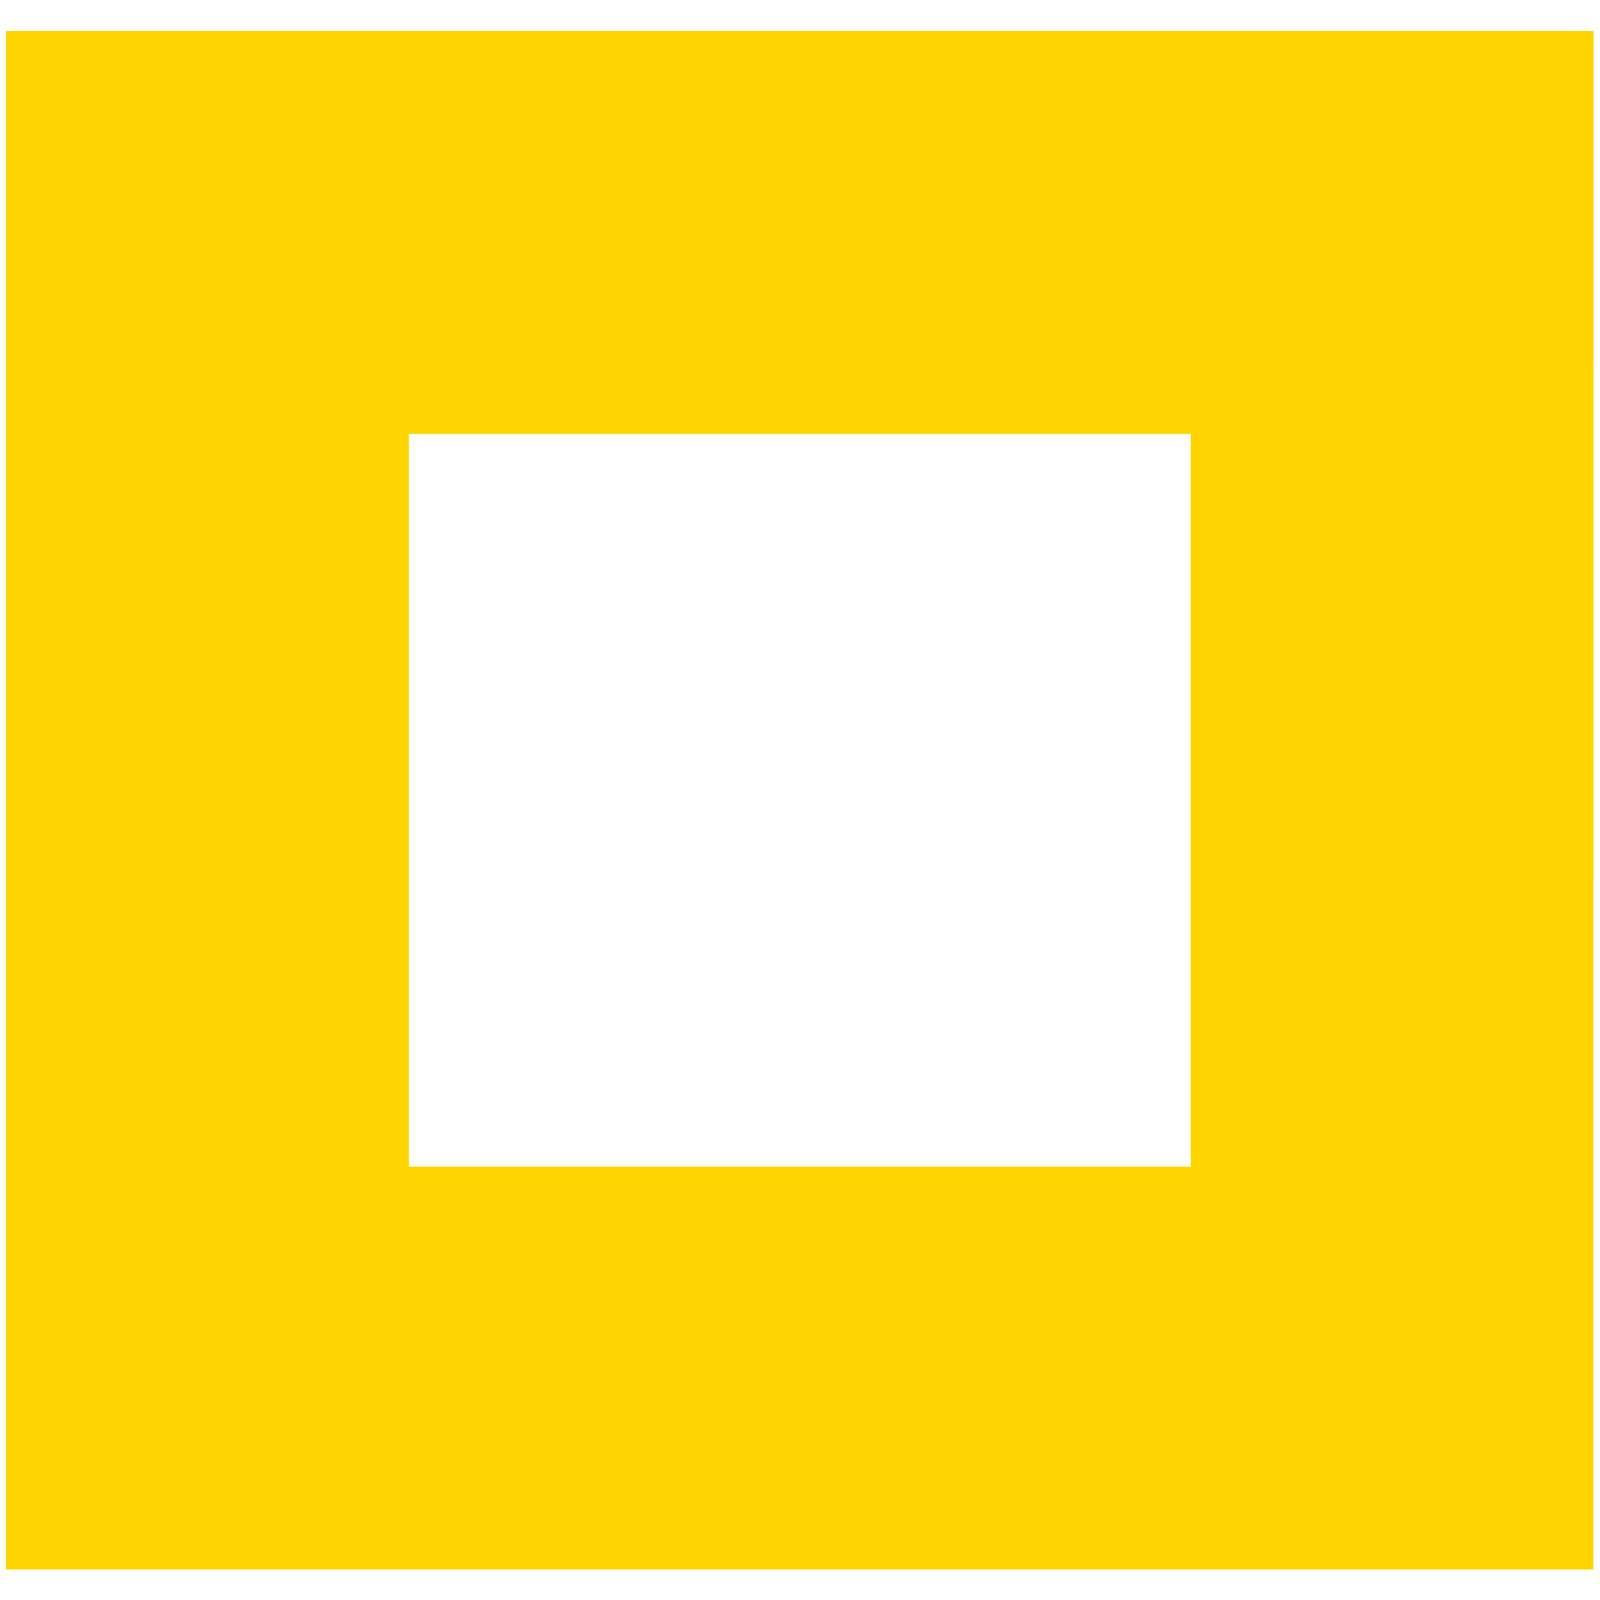 A yellow square on a transparent background